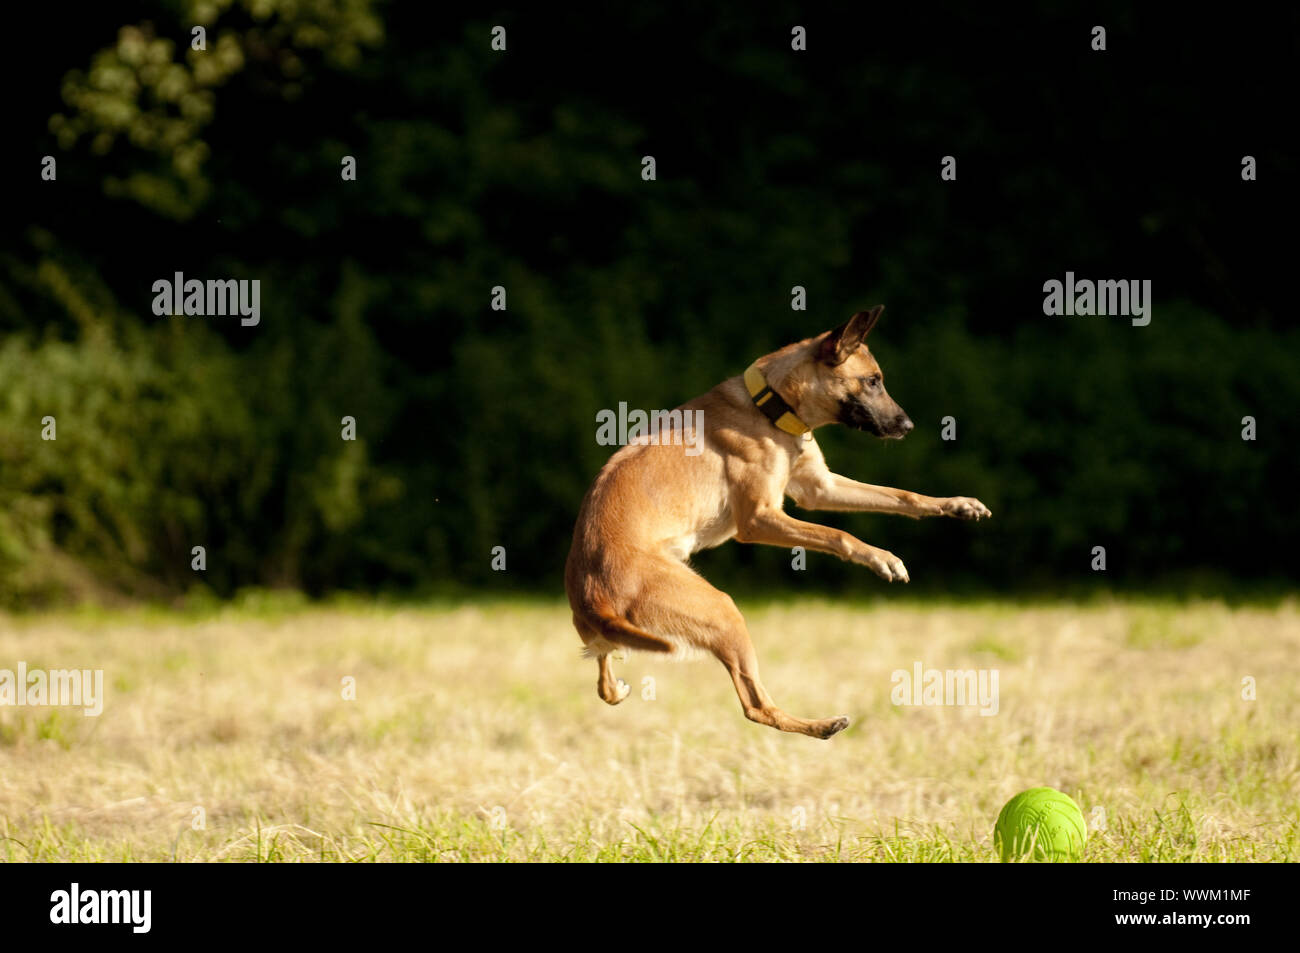 Malinois at the Frisbee game Stock Photo